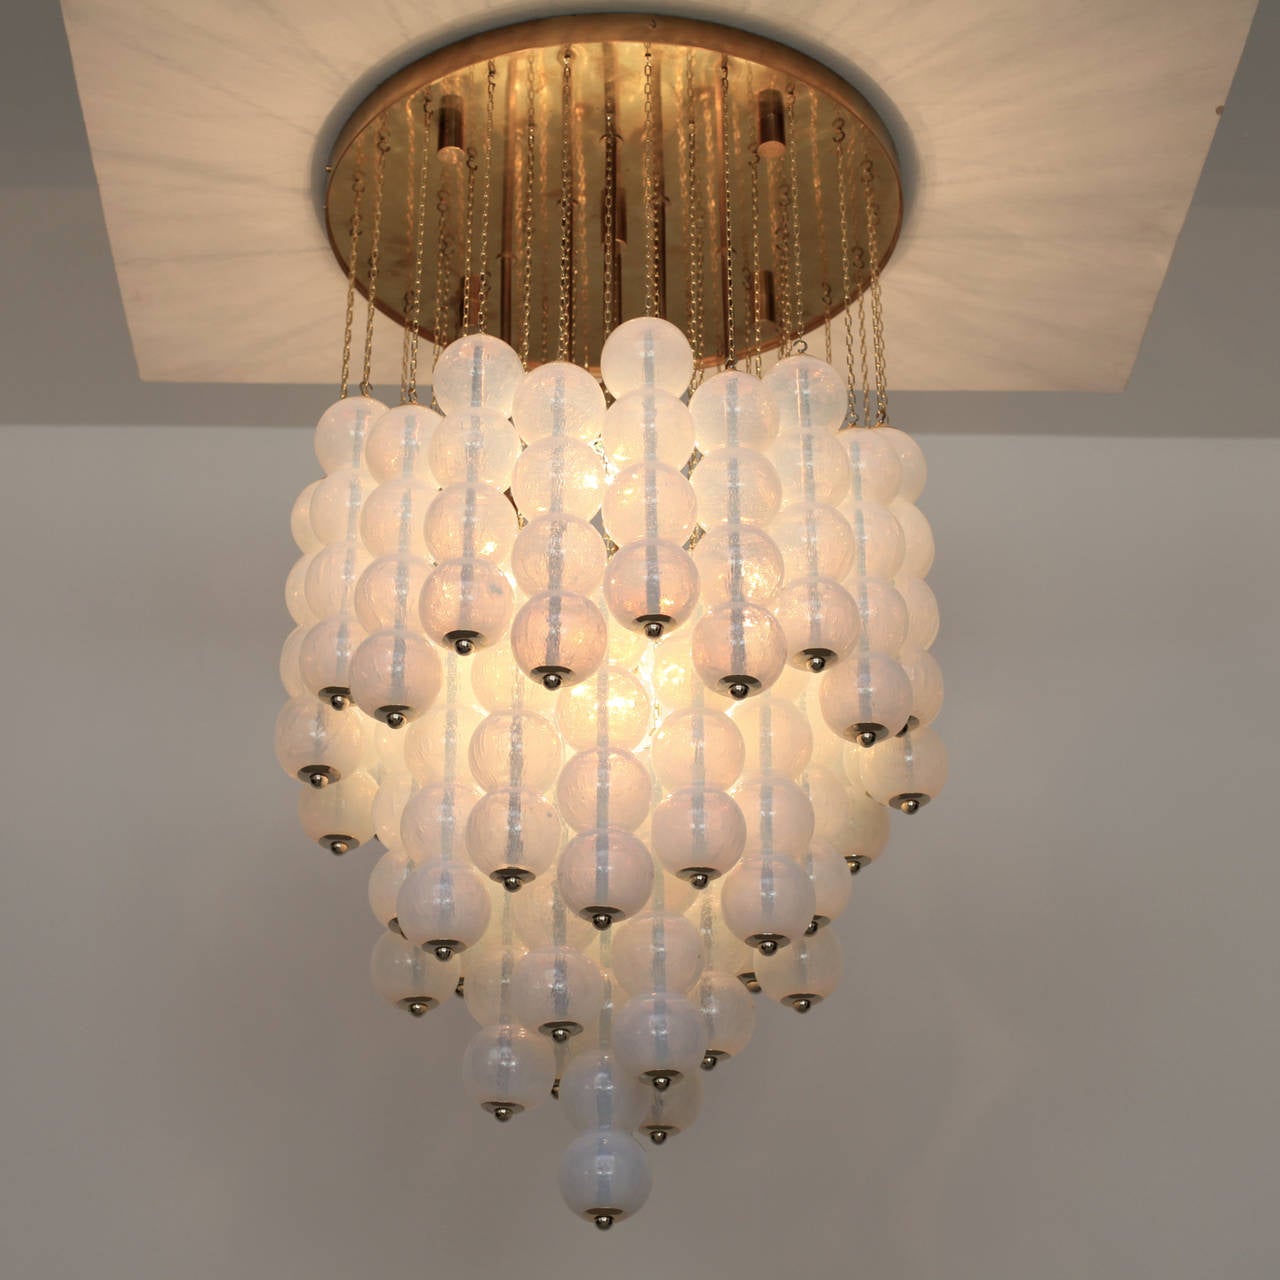 Very huge, iconic Murano opaline glass and brass chandelier by Zero Quattro. The chandelier is manufactures in high quality and is a real eyecatcher. 6 x E14.